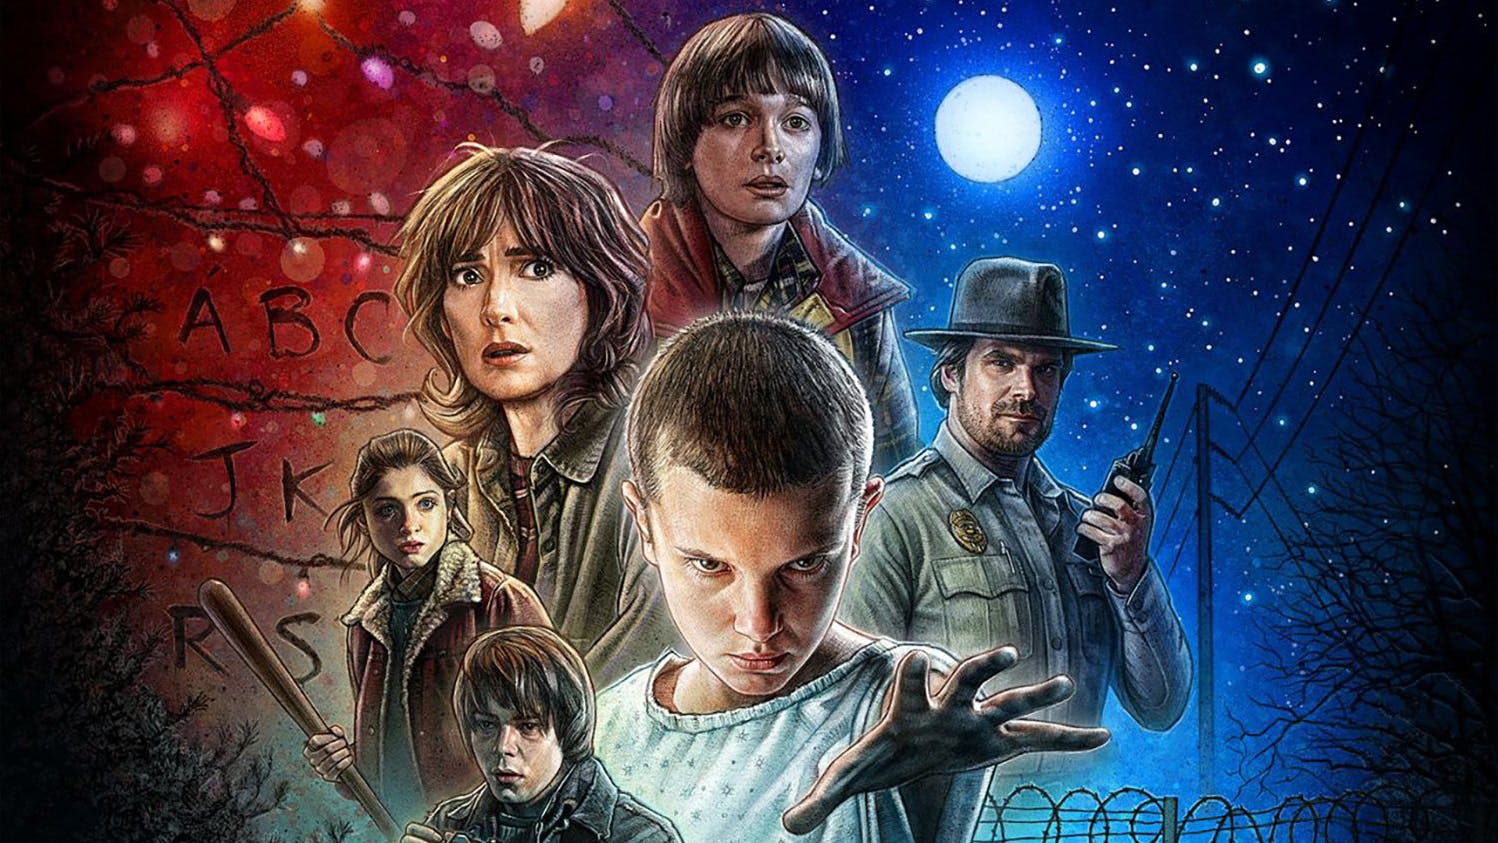 Stranger Things season 4 helms Netflix's new deal with Duffer brothers - Vox